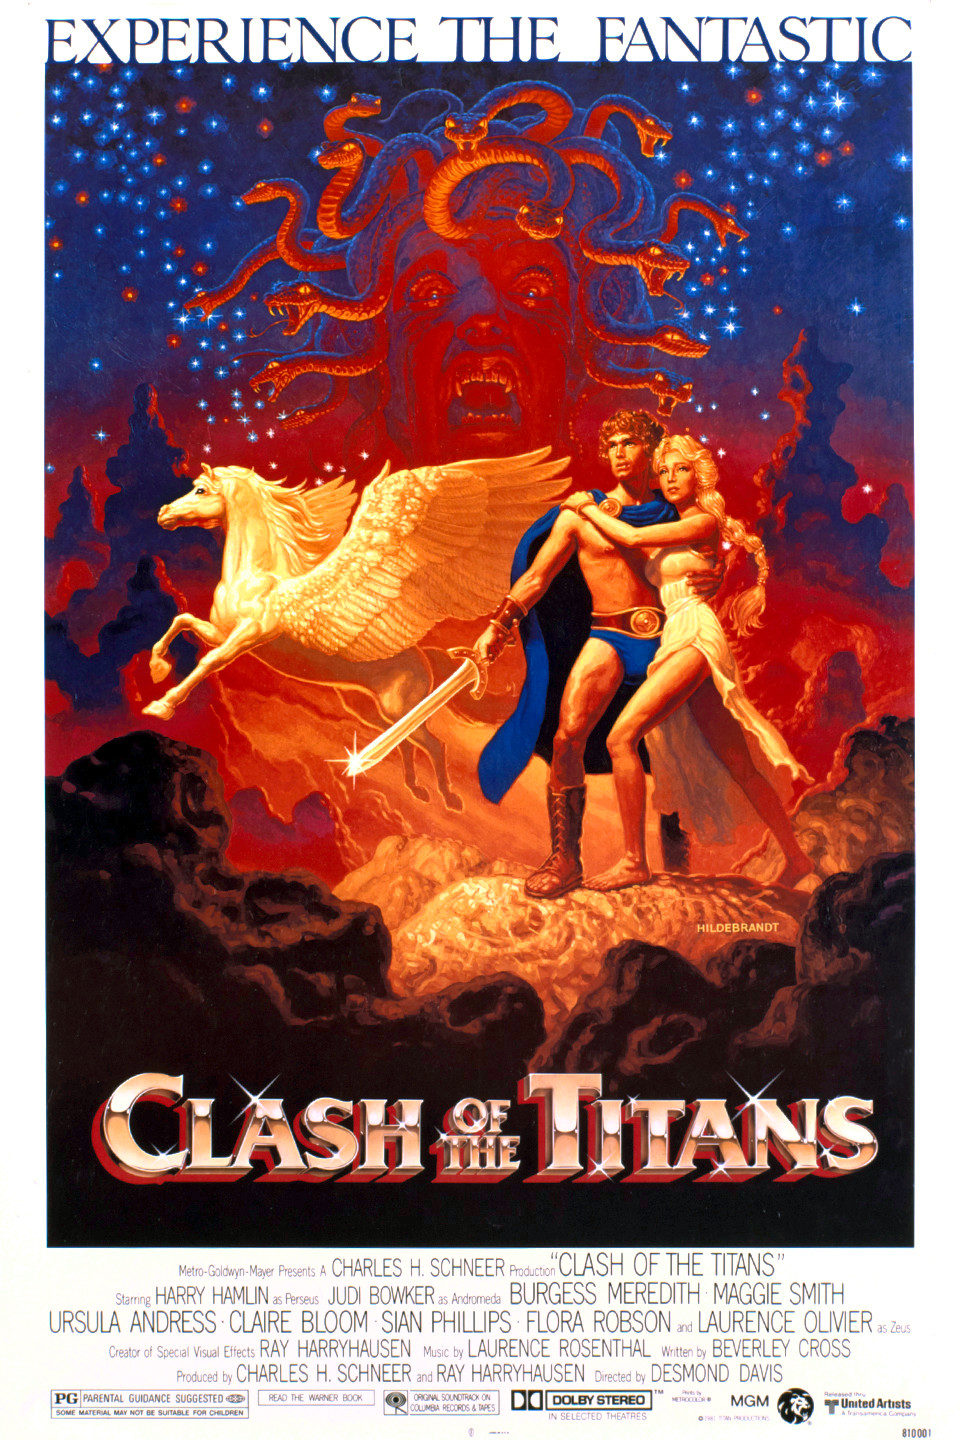 Clash of the Titans' remake shows how 3D effects can be